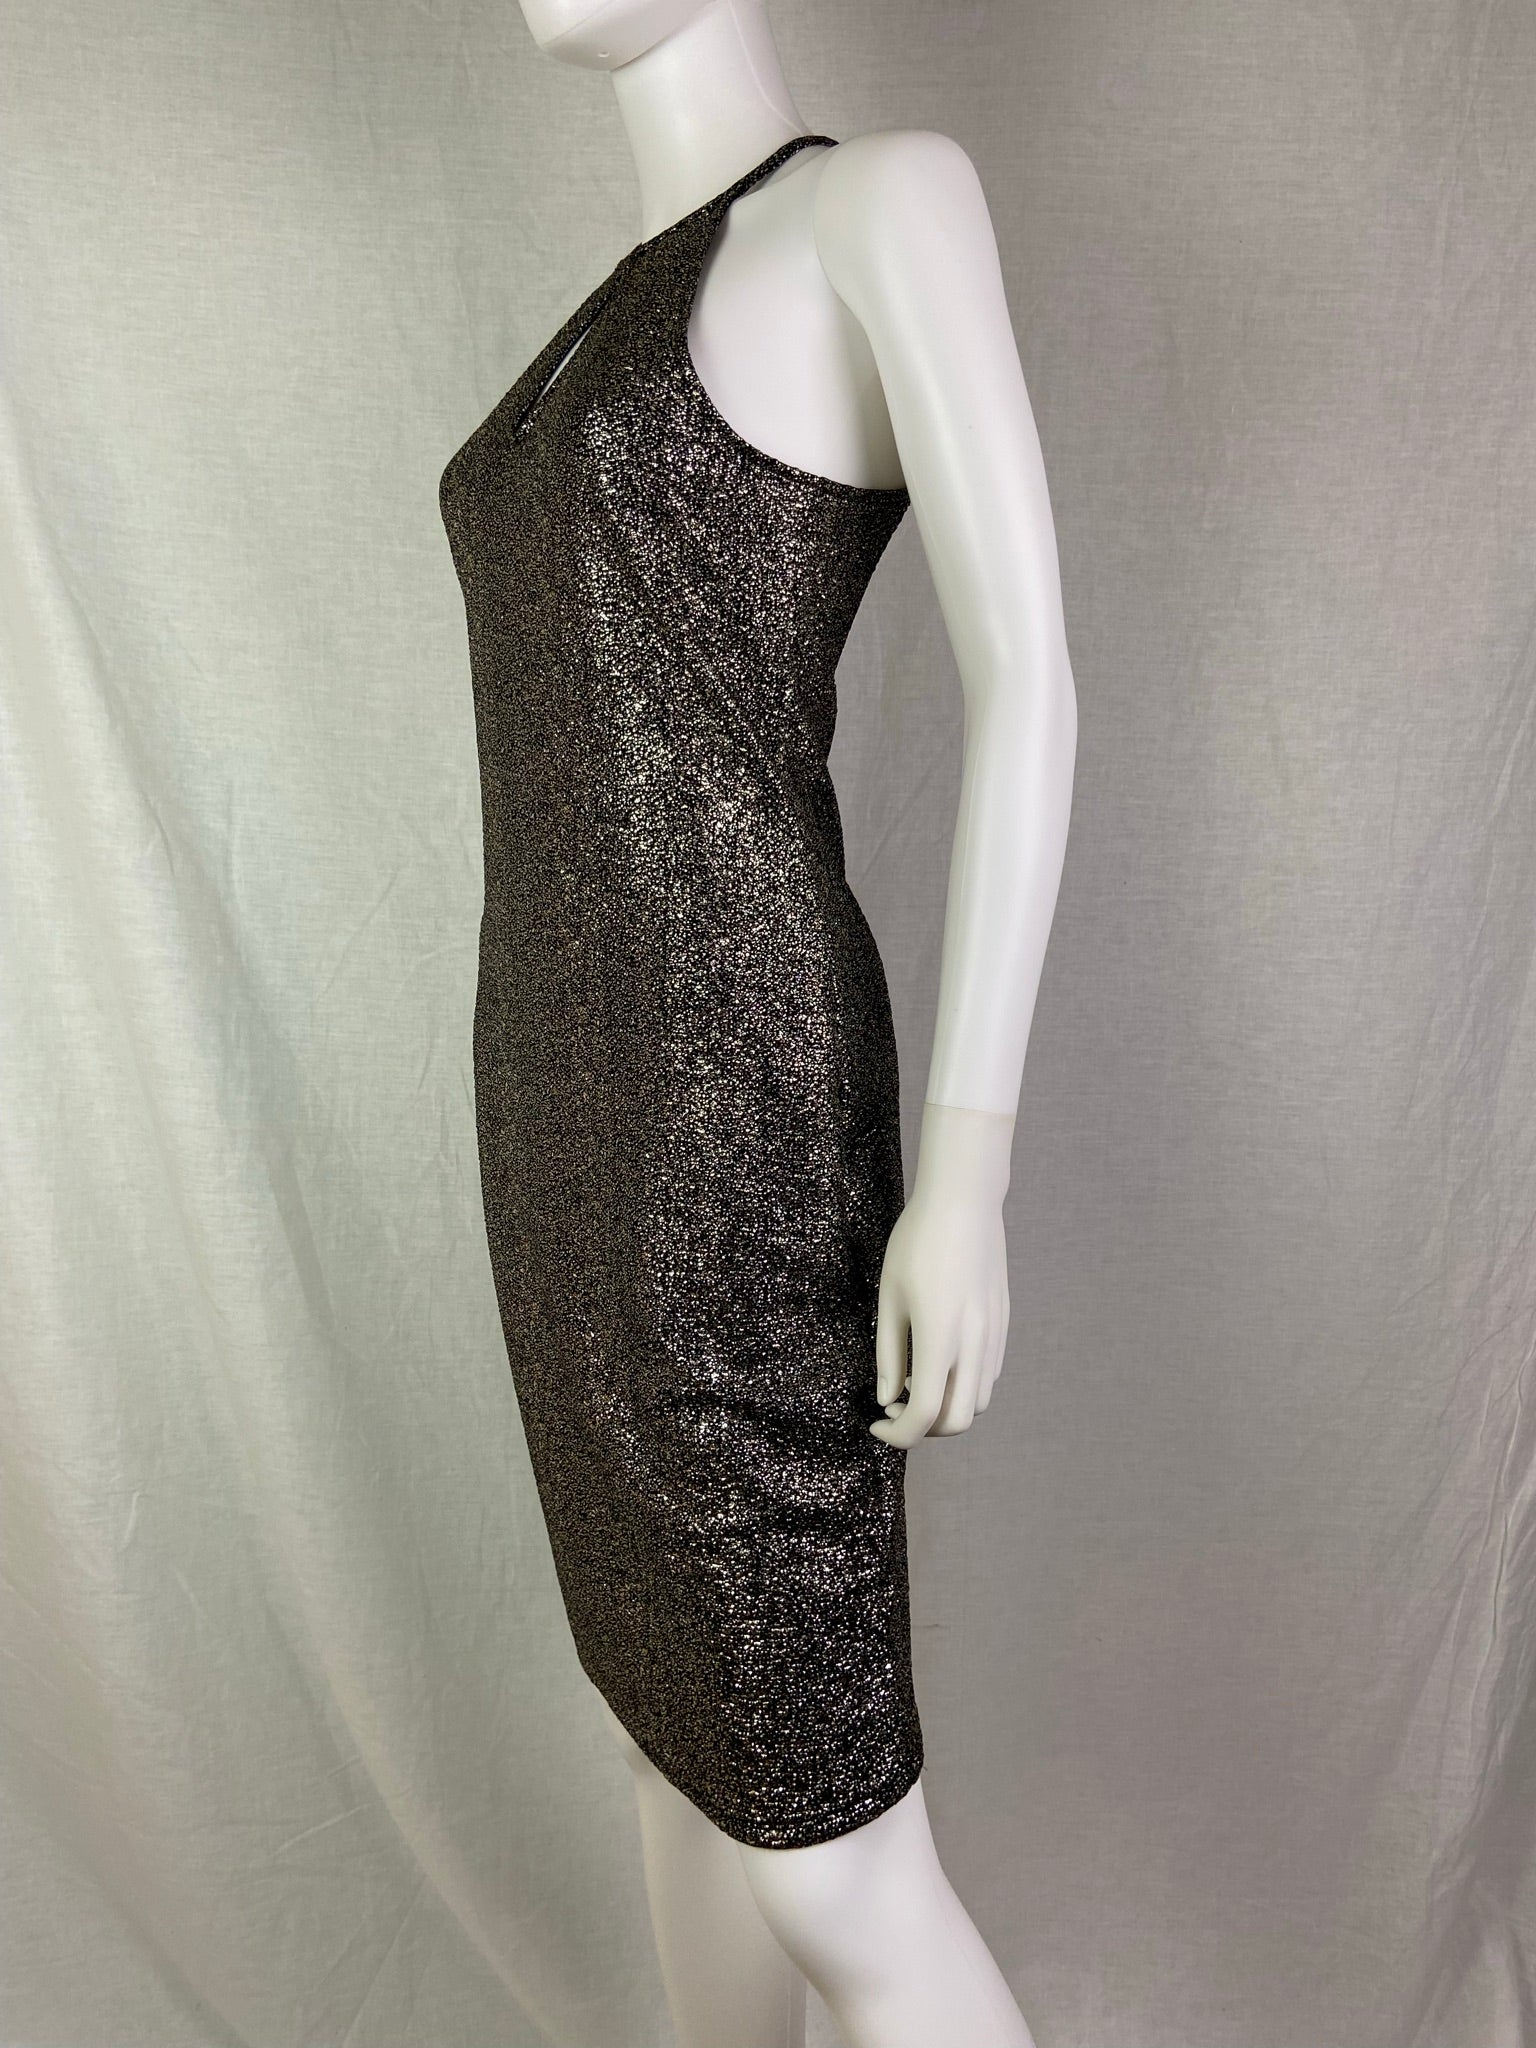 One Clothing Gold Silver Pewter Black Foil Stretch Cocktail Dress ABBY ESSIE STUDIOS